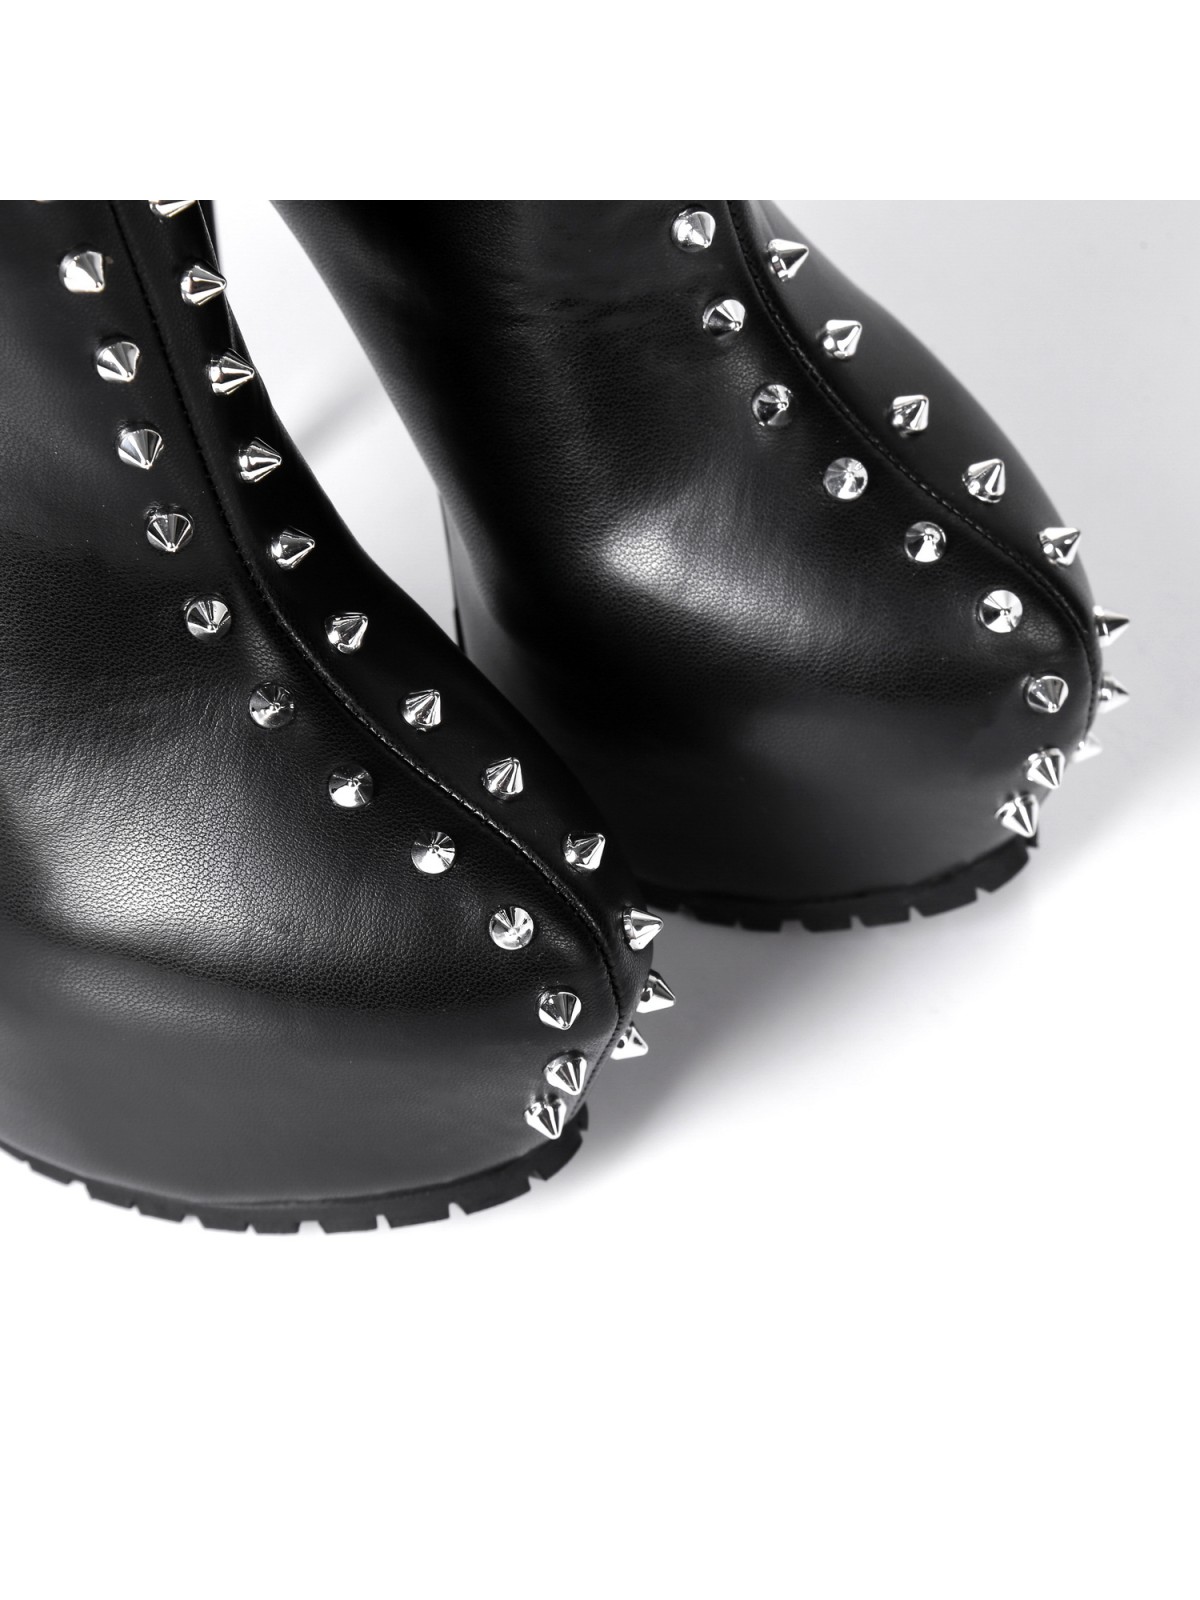 Giaro SOPHIA black thigh high boots with silver spikes